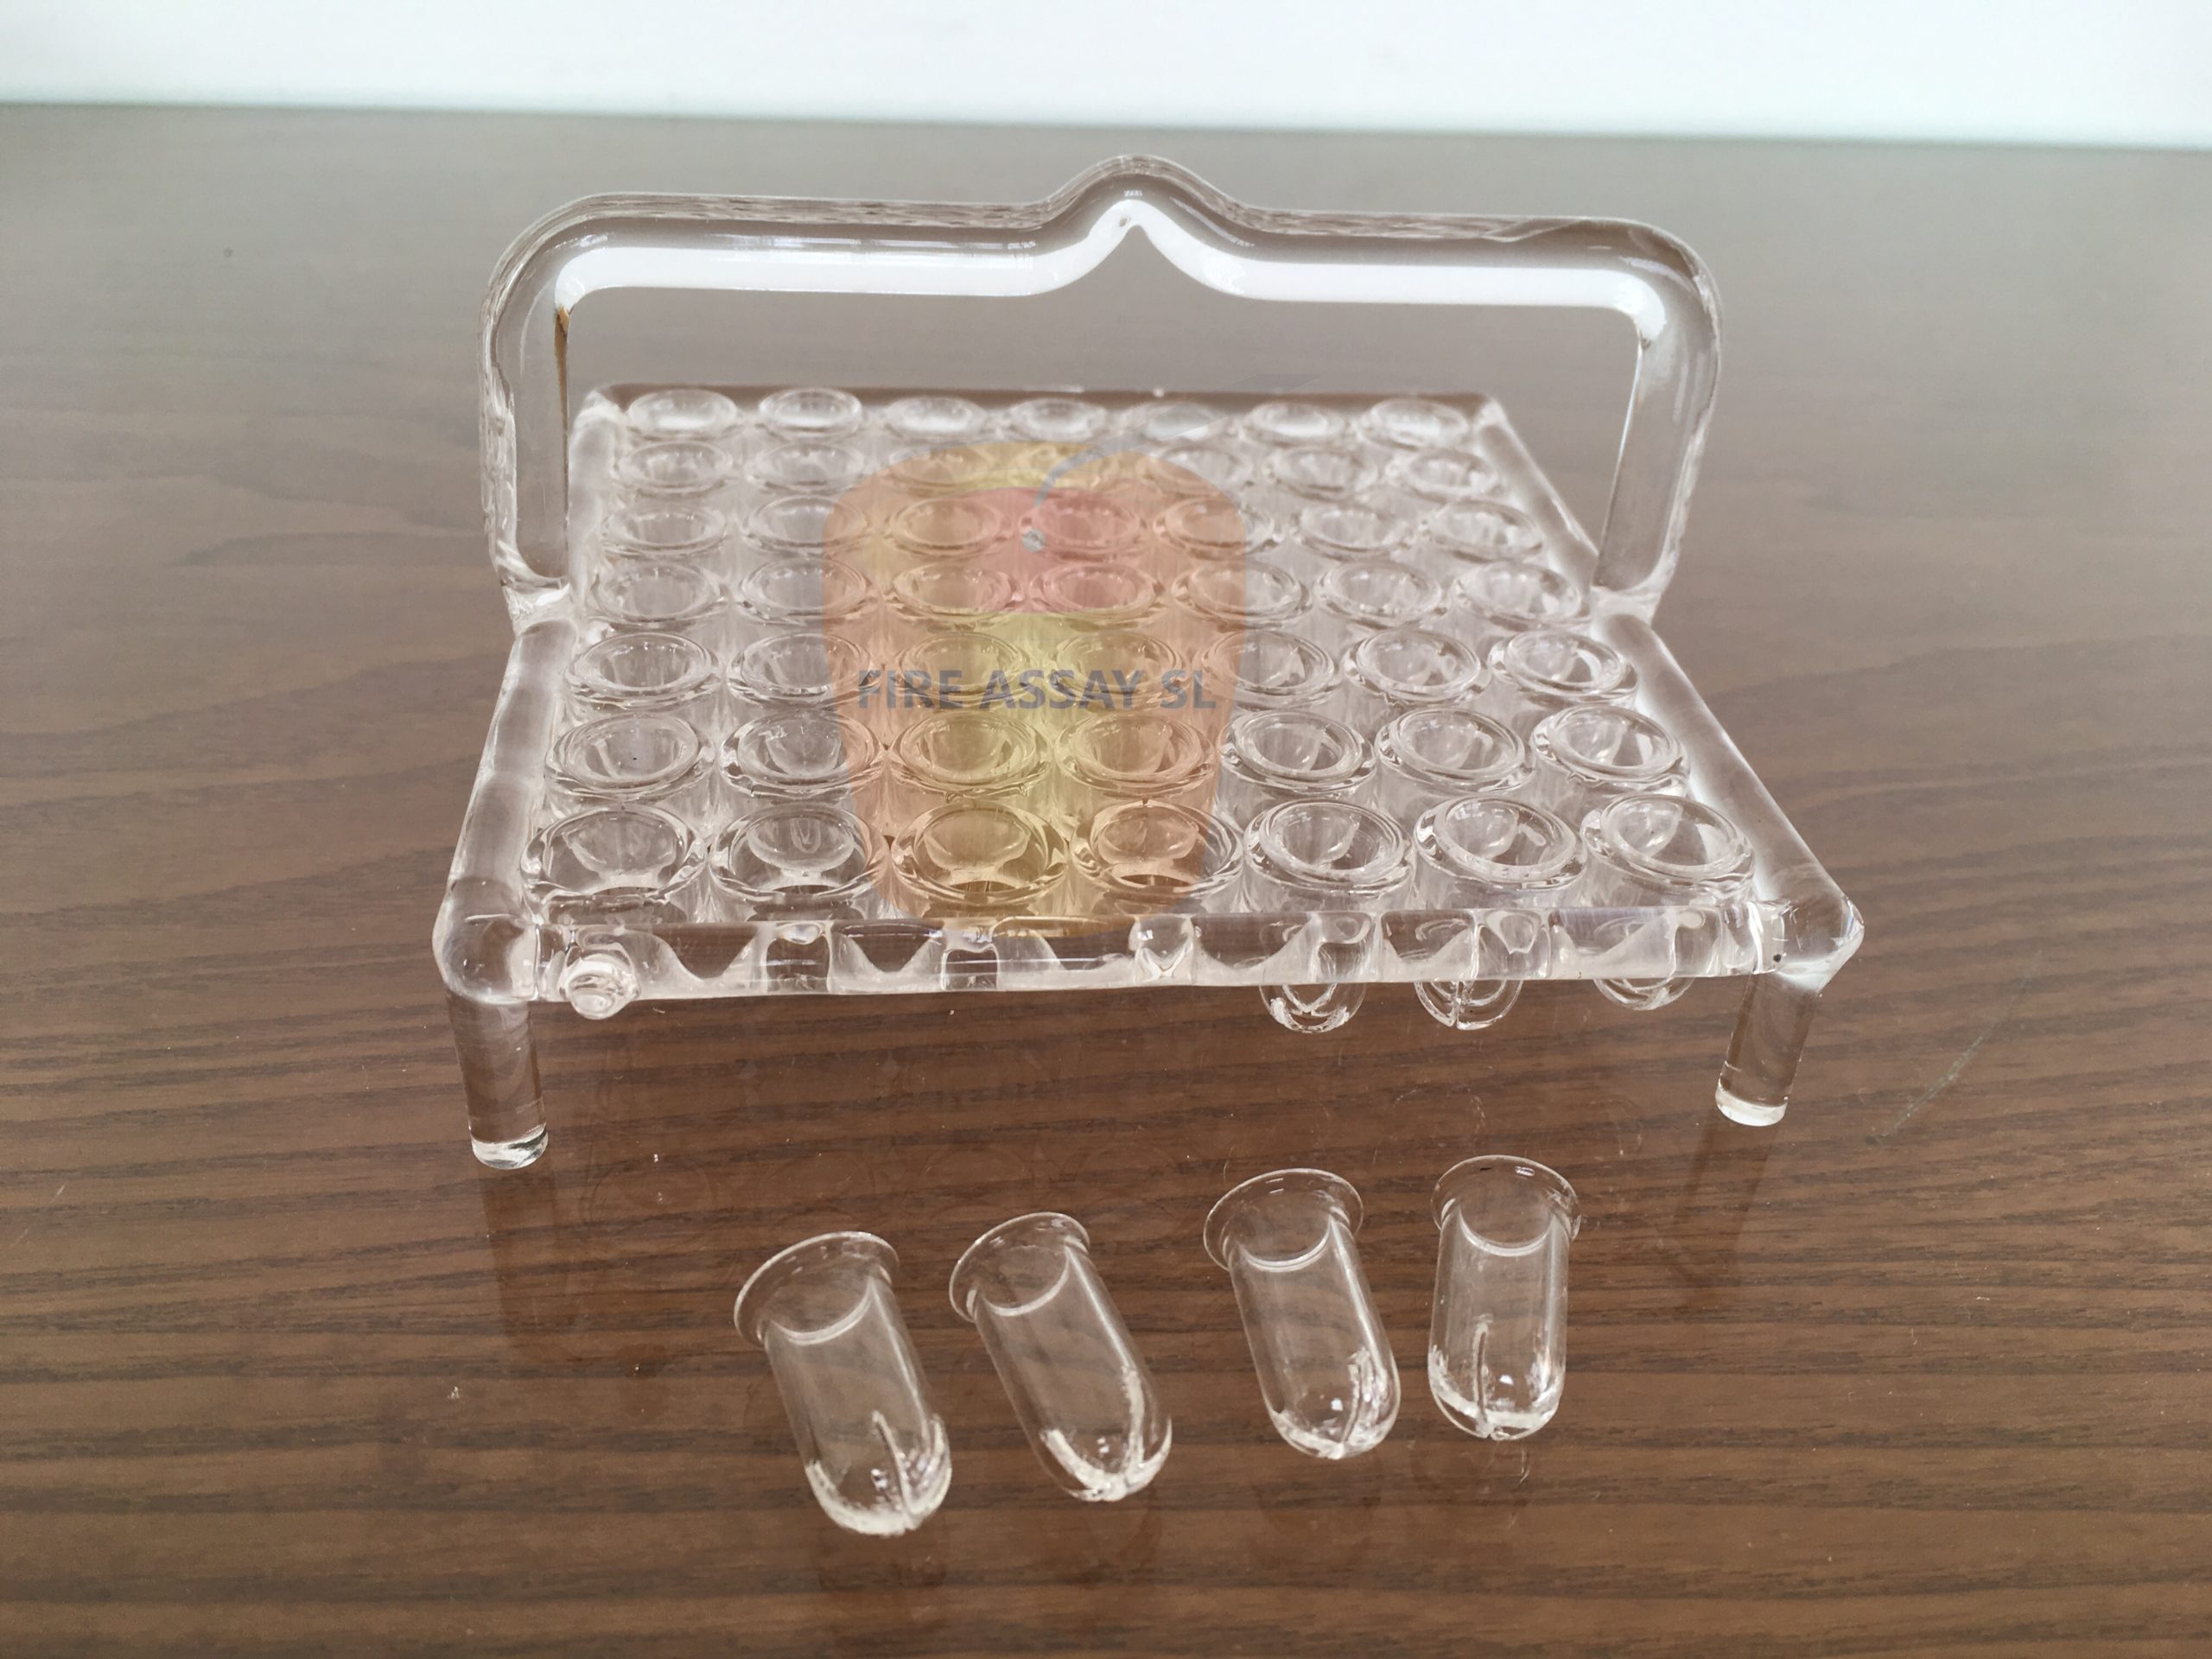 Quartz parting and annealing trays / baskets